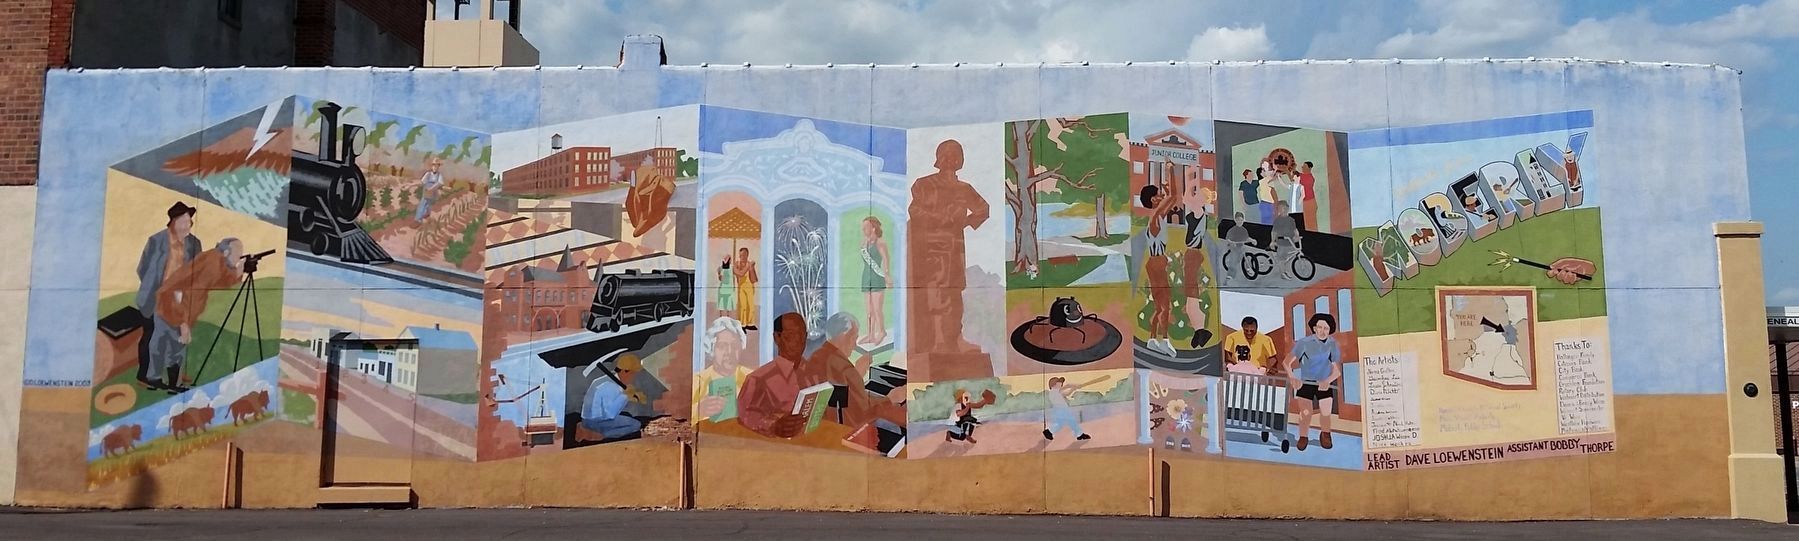 Moberly Historic Mural (<i>across street from the marker</i>) image. Click for full size.